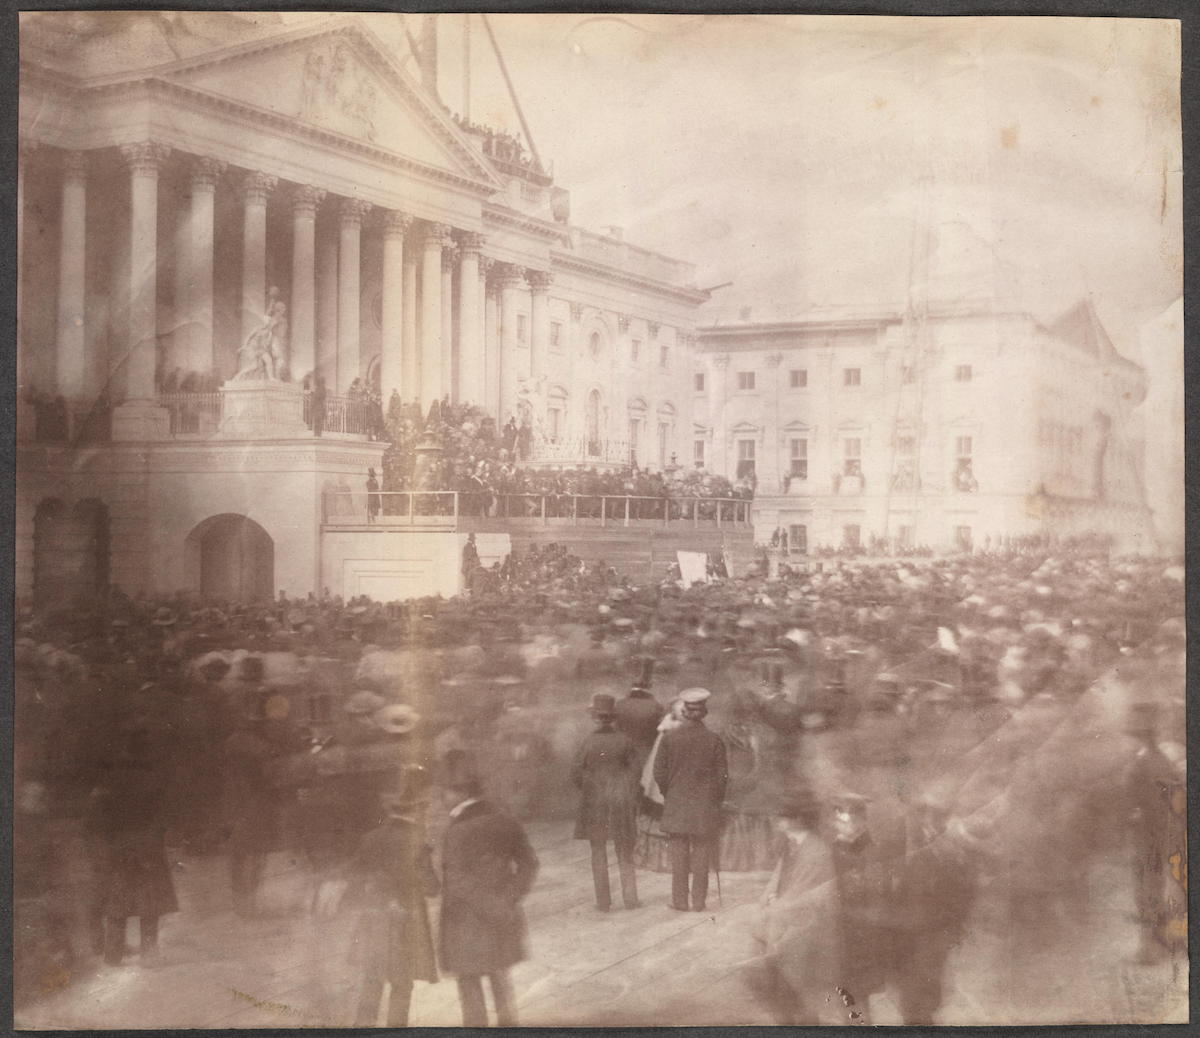 This is the Oldest Known Photo of a U.S. Presidential Inauguration - James Buchanan 1857